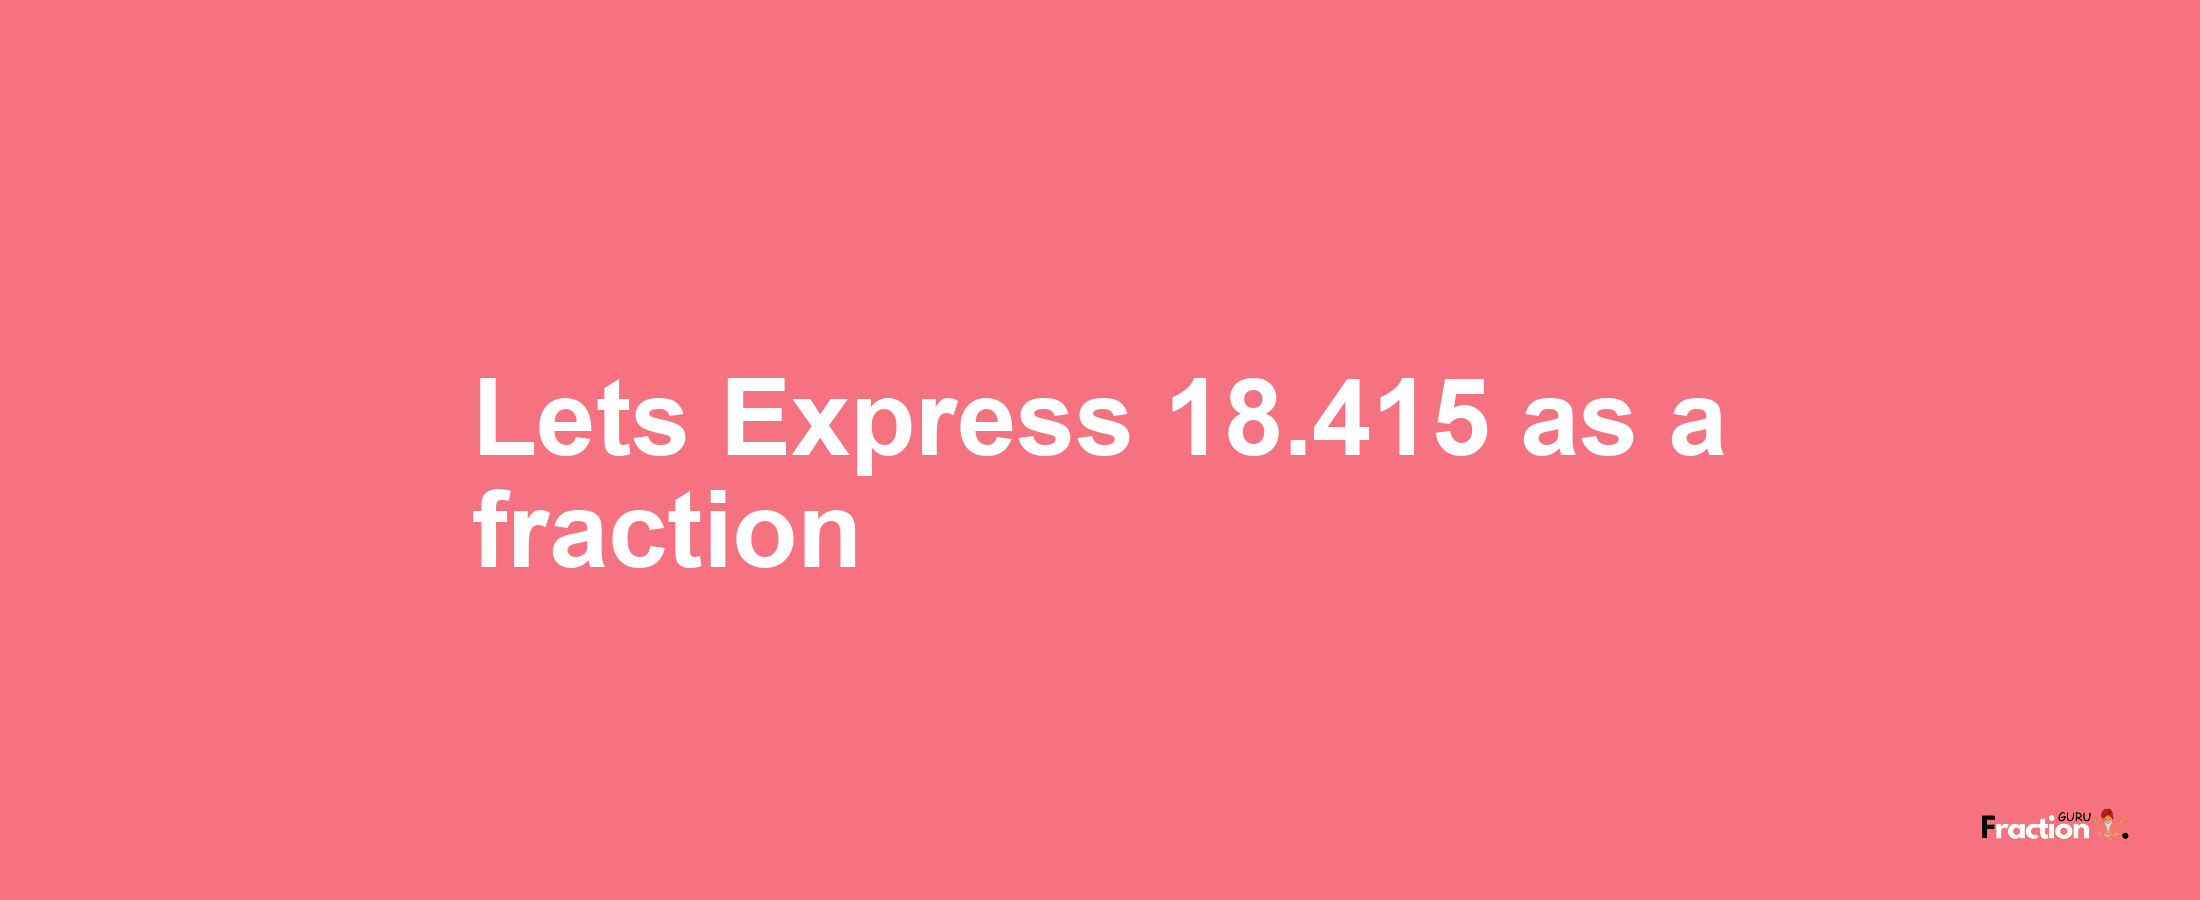 Lets Express 18.415 as afraction